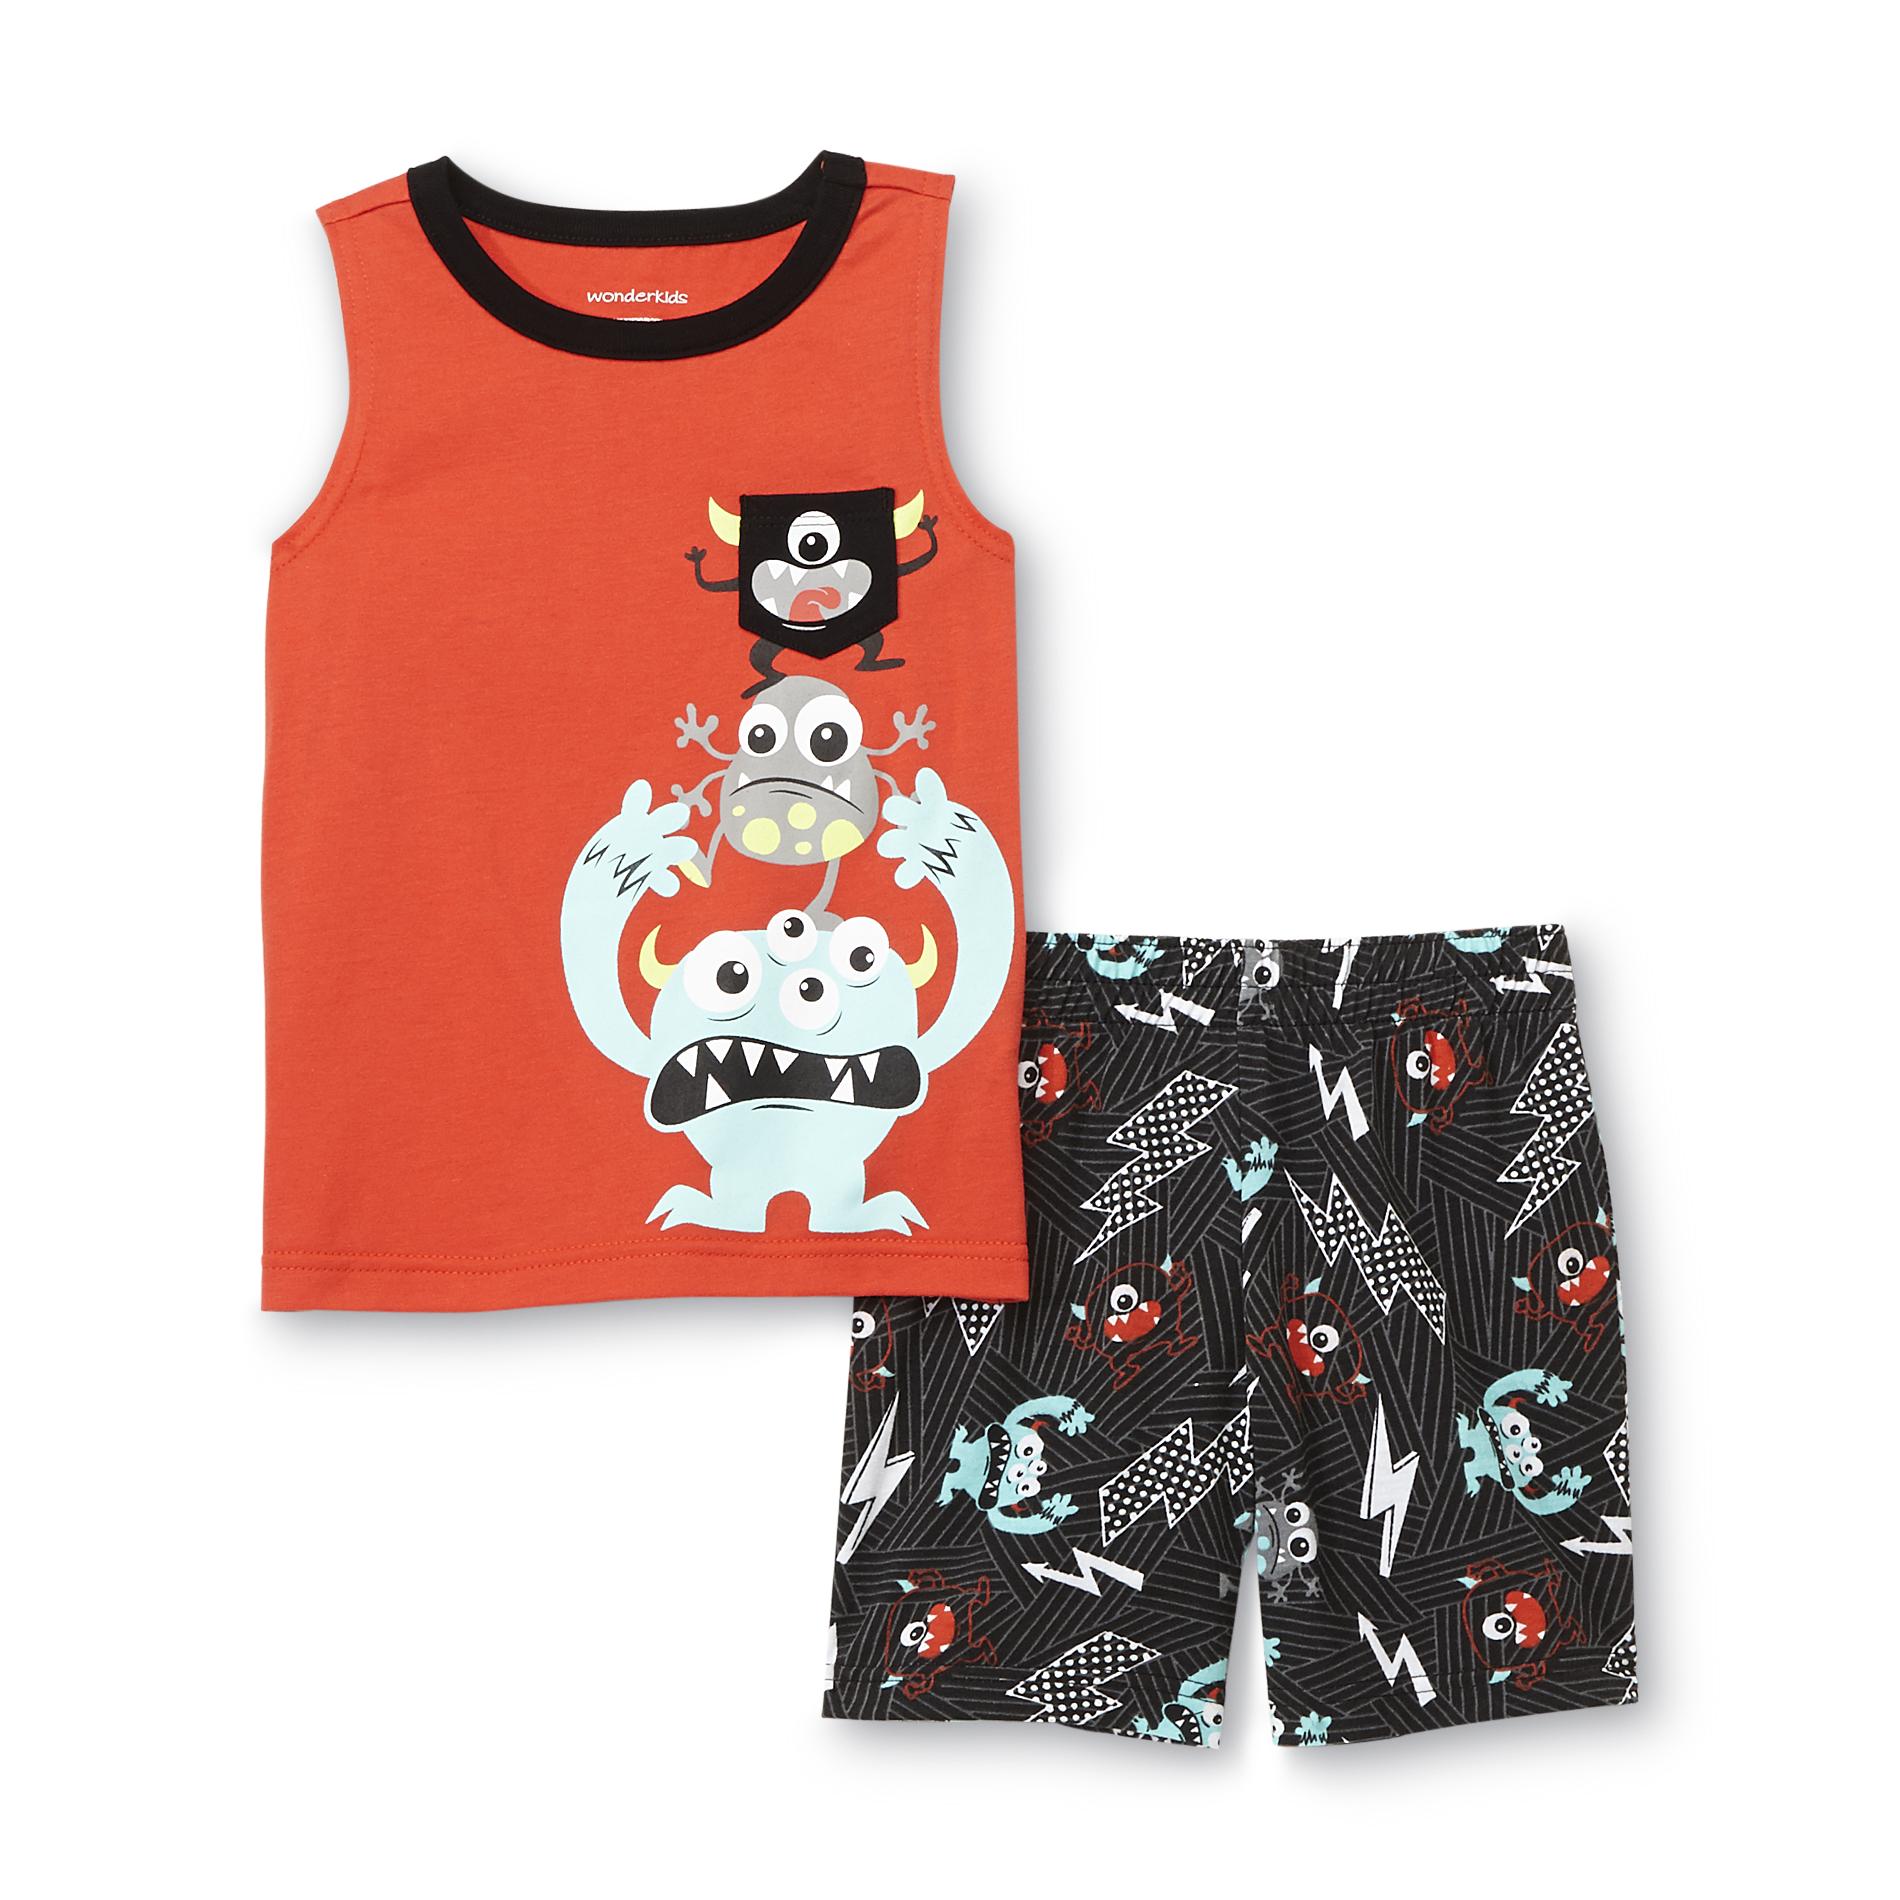 WonderKids Infant & Toddler Boy's Graphic Tank Top & Shorts - Monsters